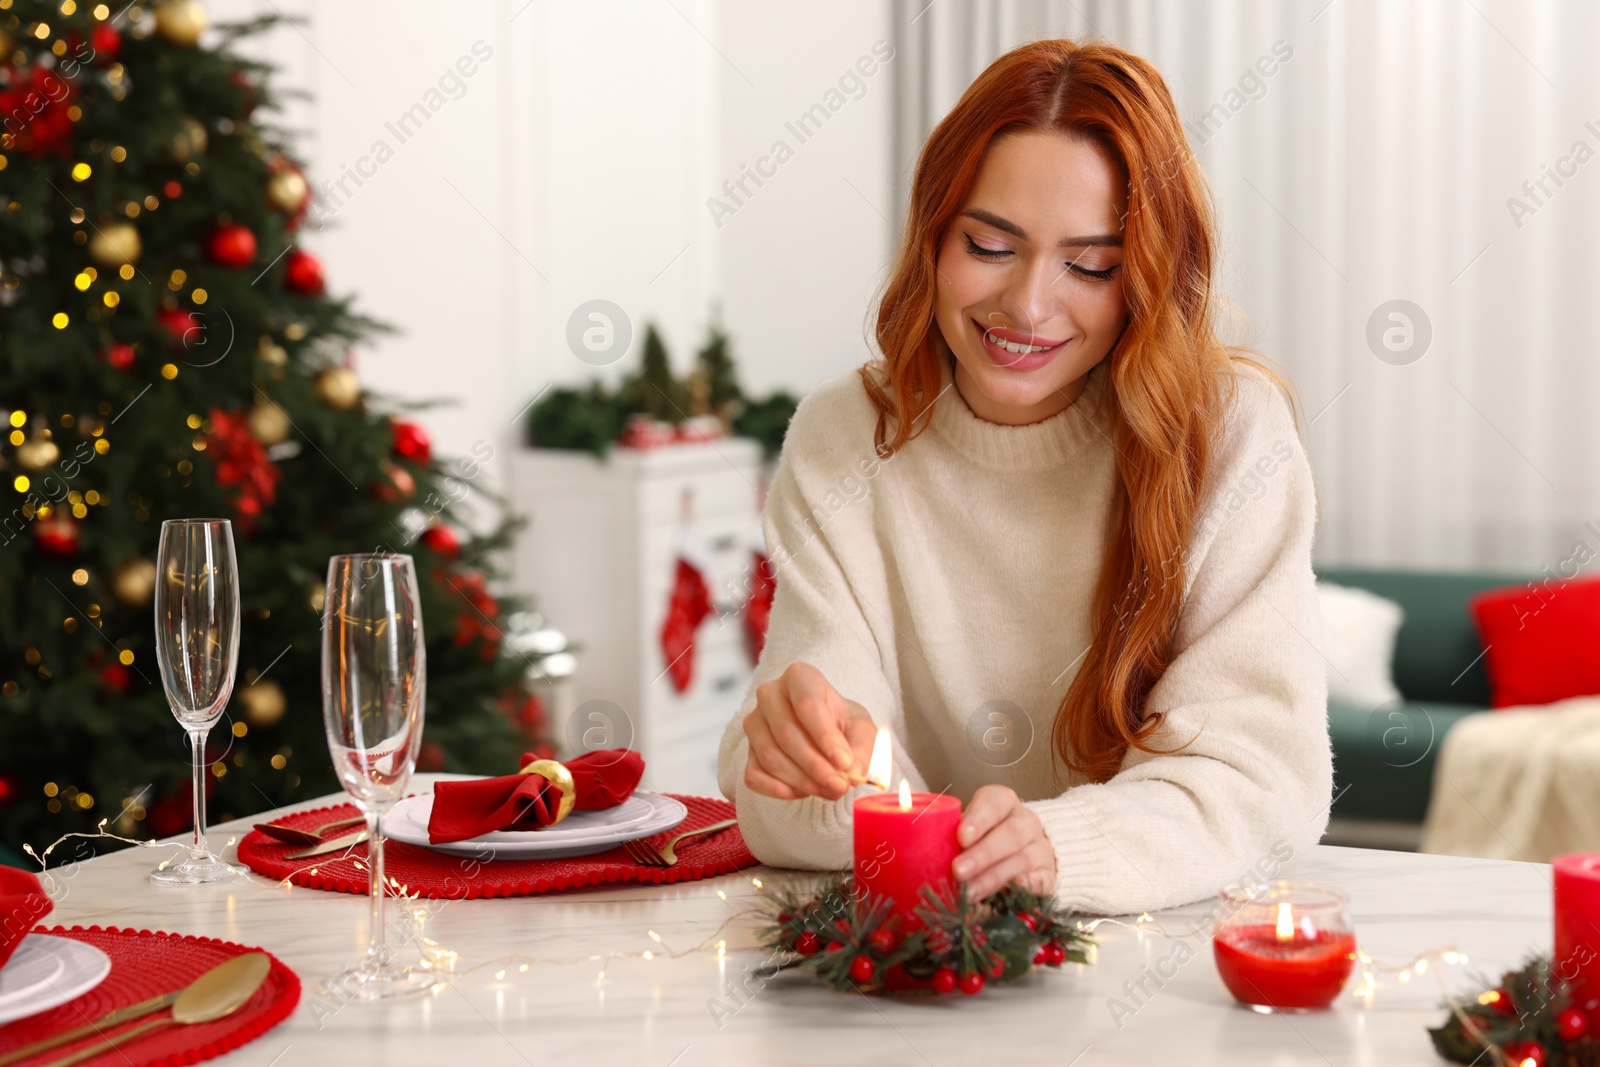 Photo of Beautiful young woman lighting candle at table in room decorated for Christmas